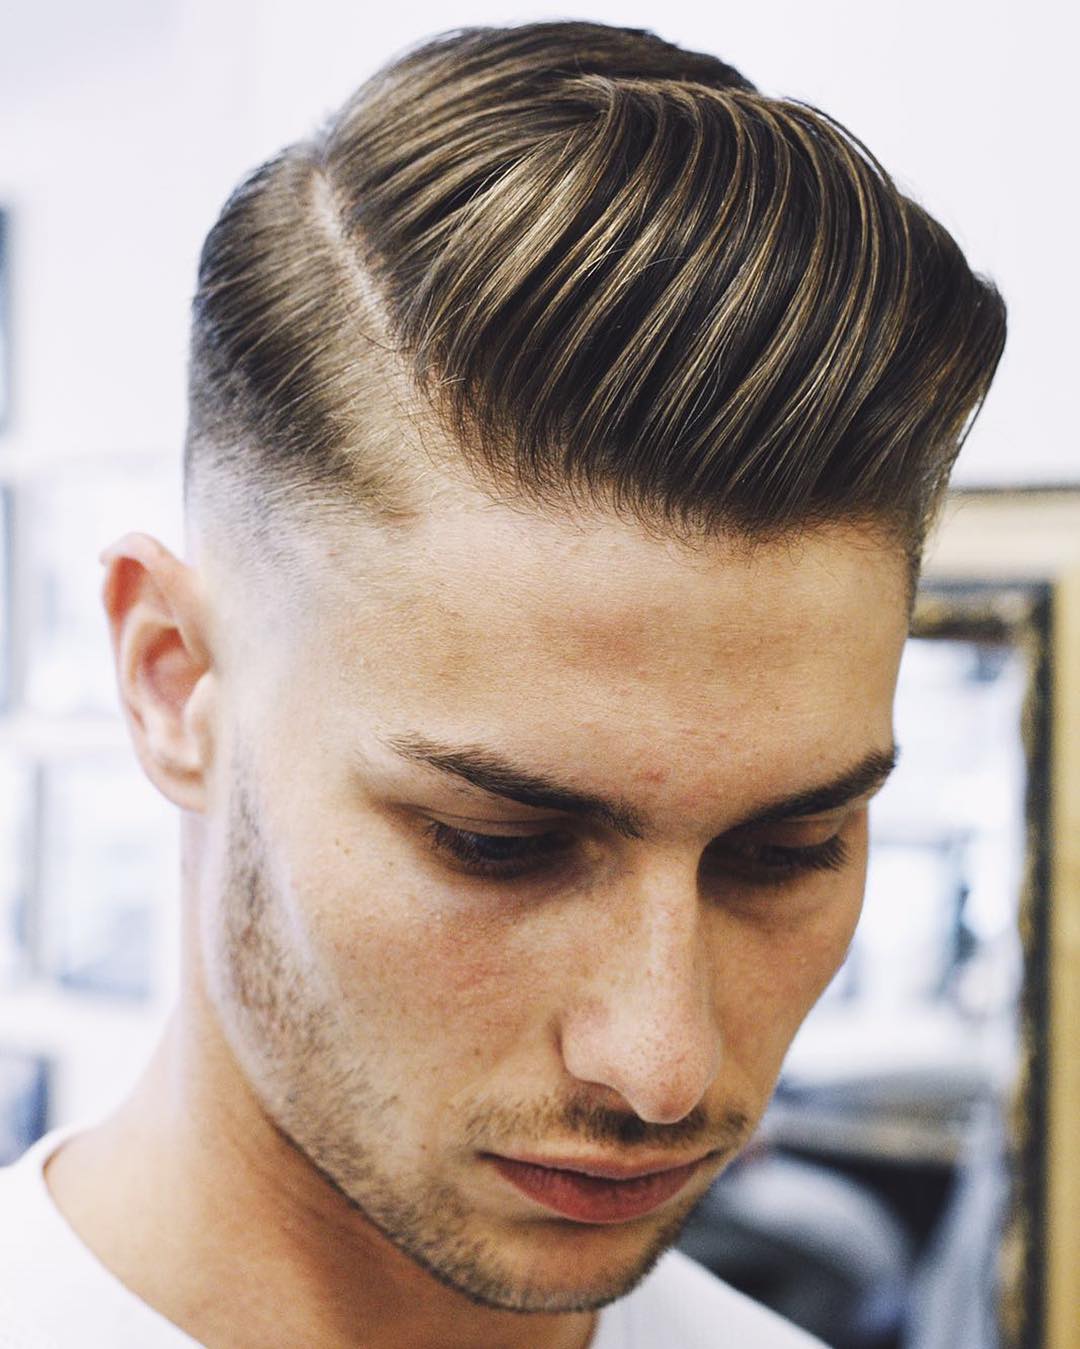 Sleek Side Parted Hairstyle for Men